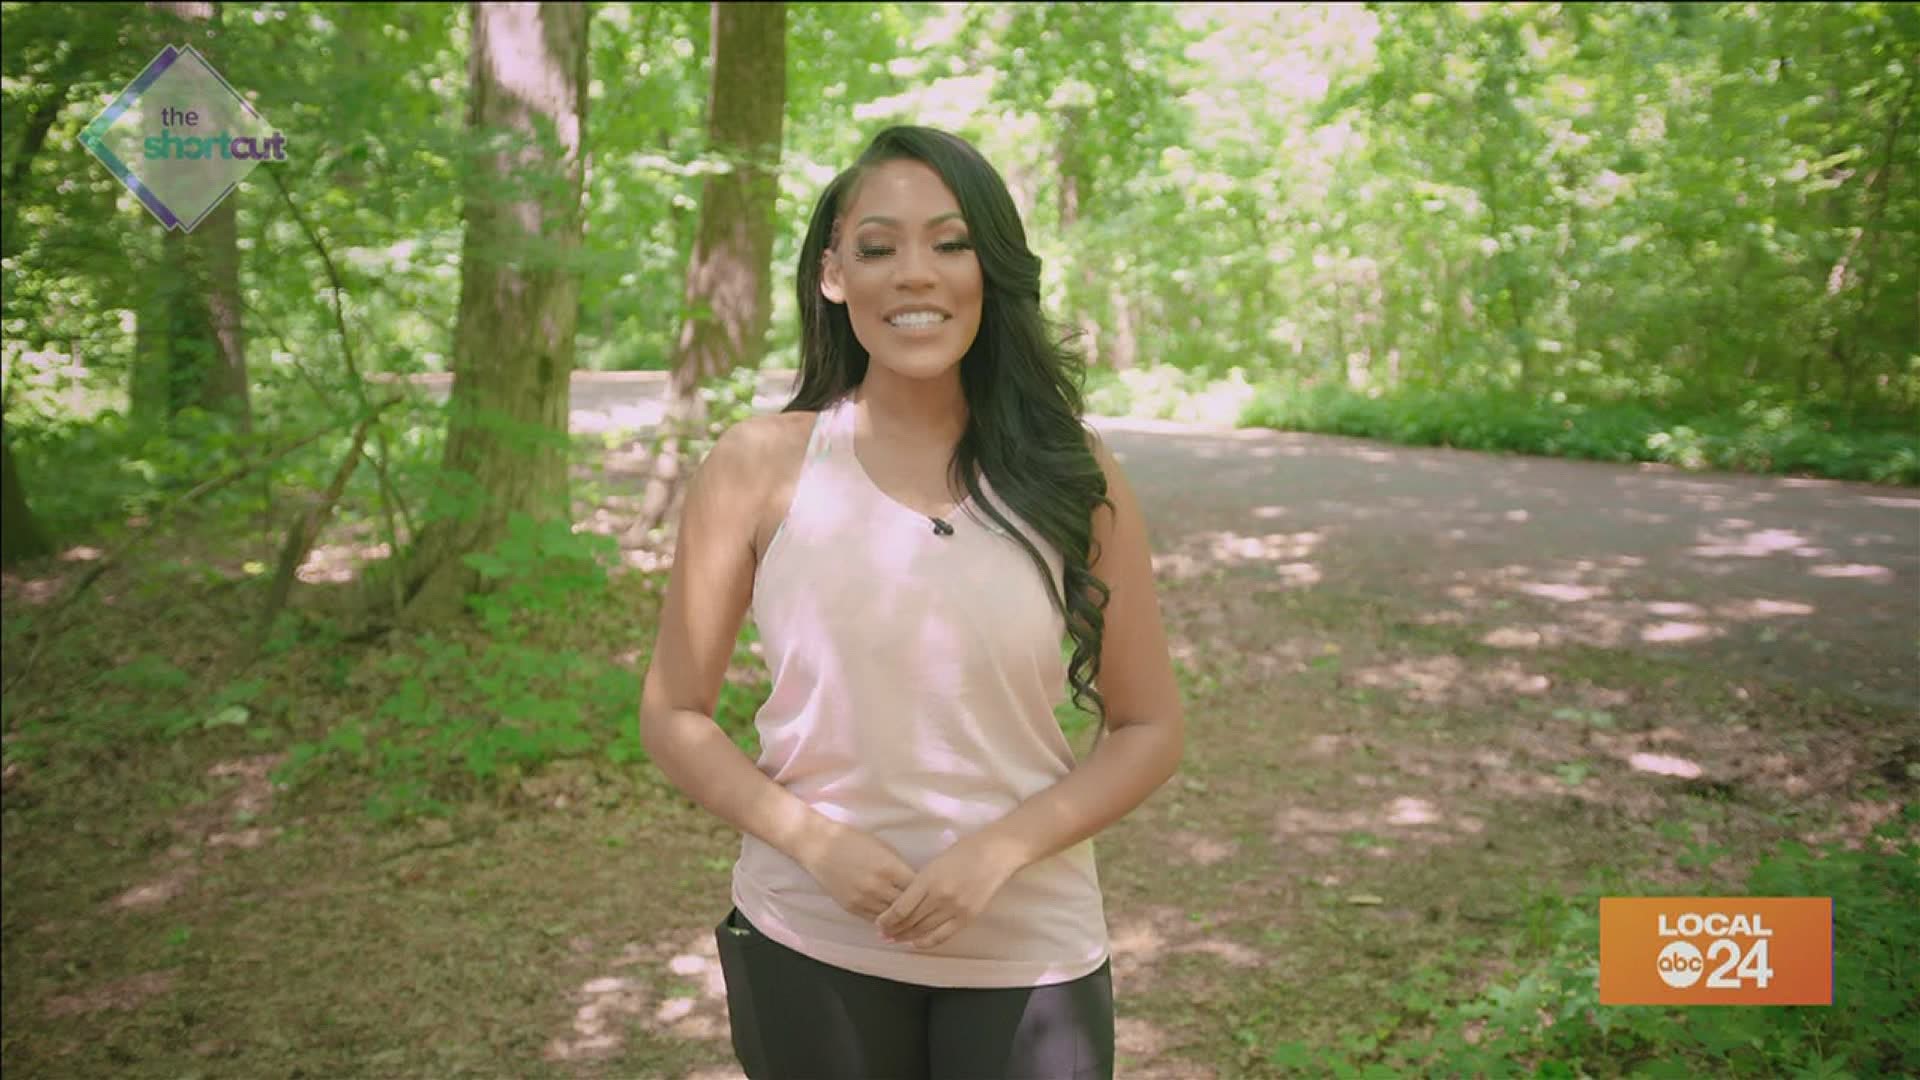 Join Sydney Neely on this exclusive "Shortcut" as we take a walk in two of Memphis's most notable parks: Overton Park and Big River Crossing!